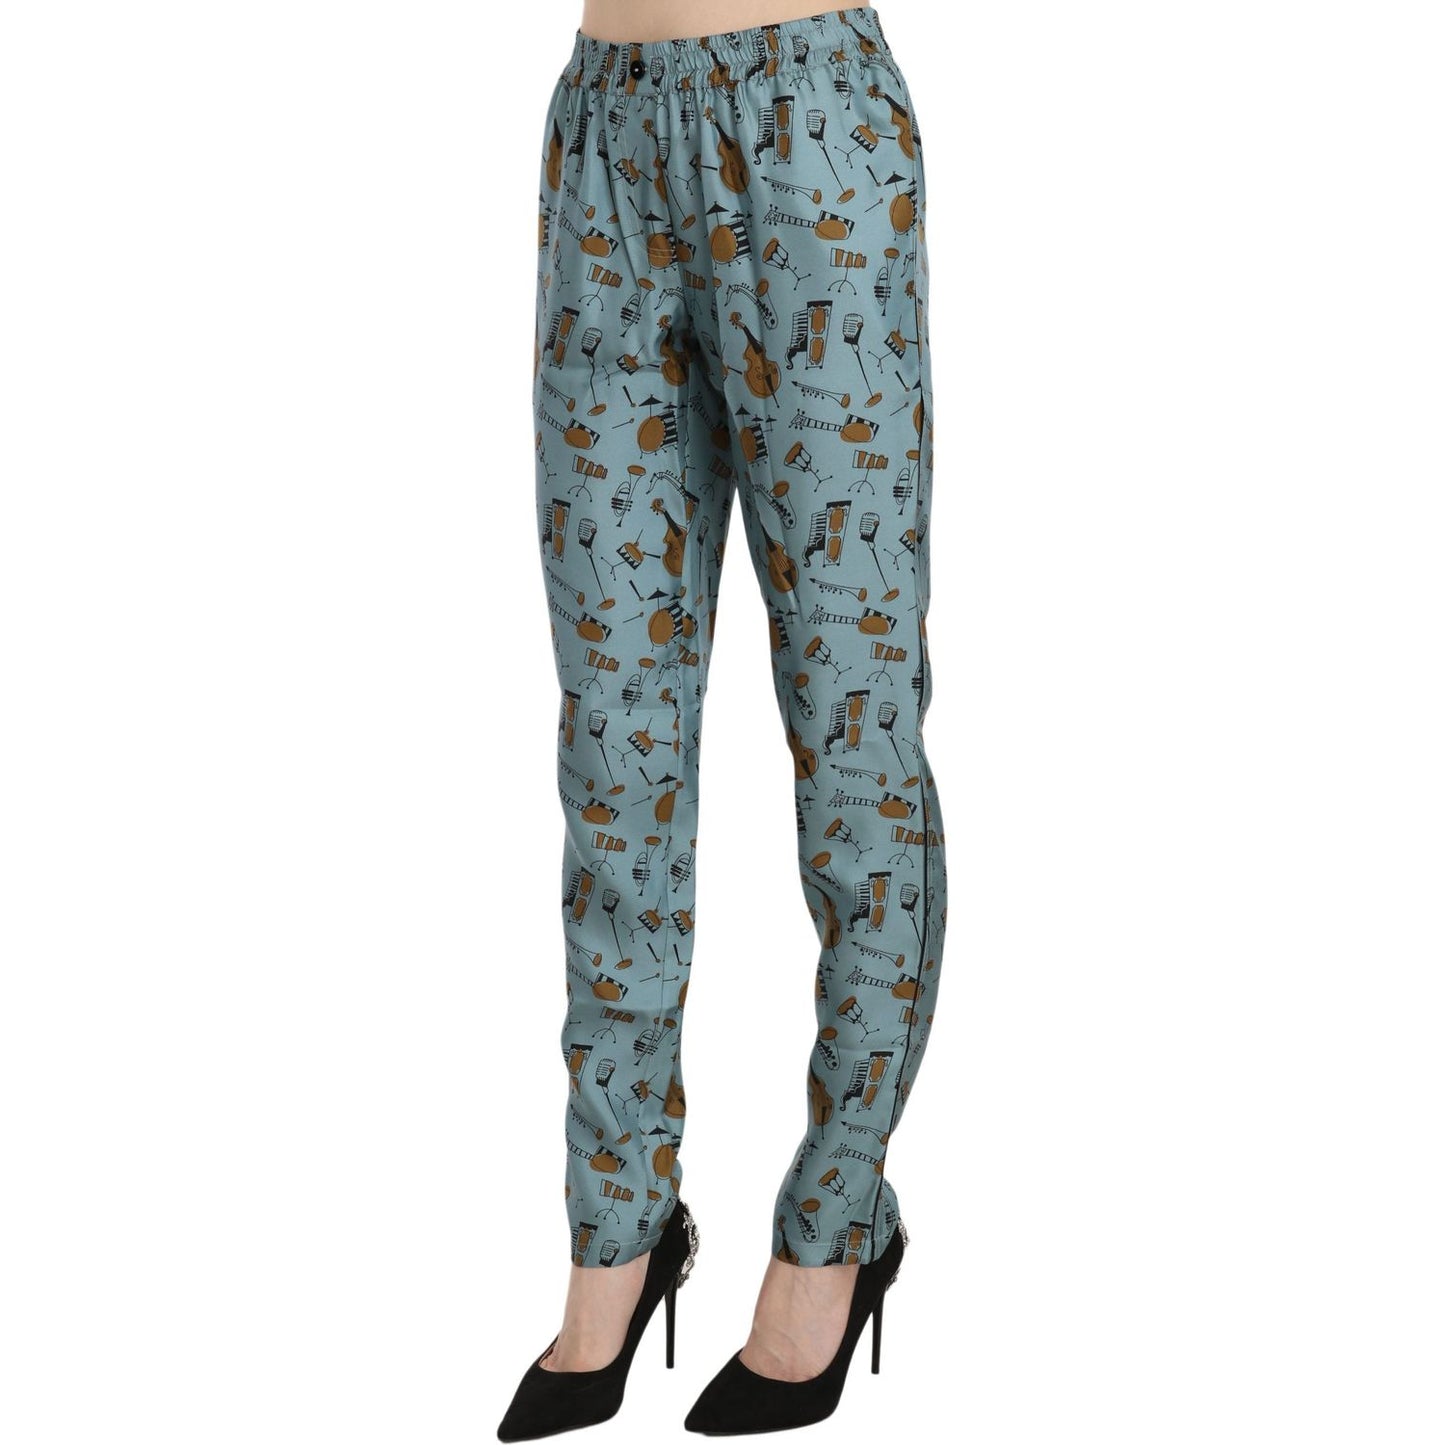 Dolce & Gabbana High Waist Tapered Silk Pants in Blue Print blue-musical-instruments-print-tapered-pants